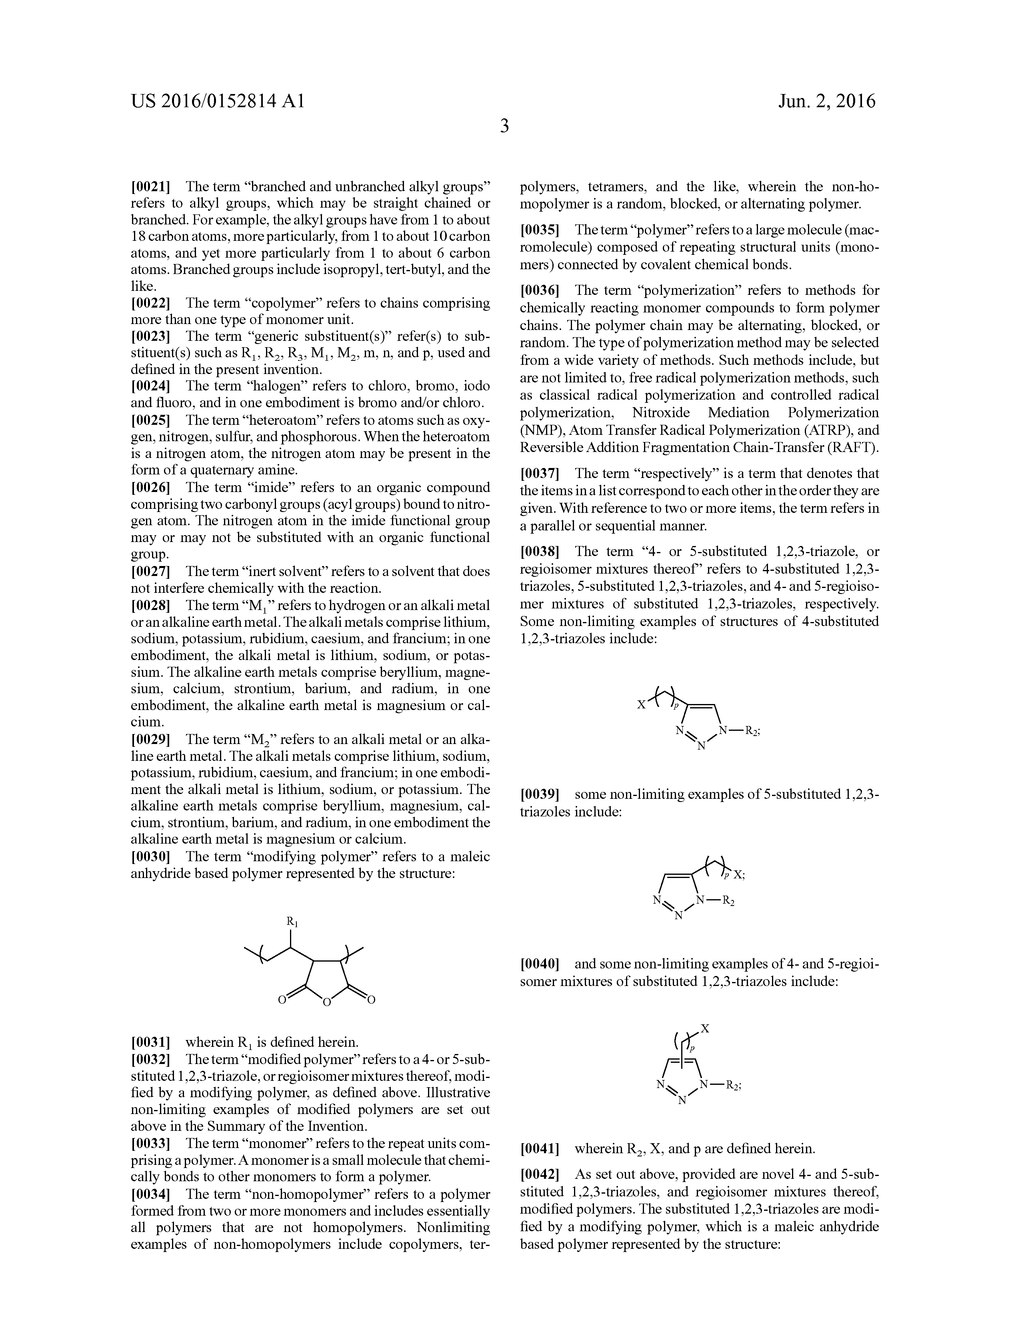 4- AND 5-SUBSTITUTED 1,2,3-TRIAZOLE, AND REGIOISOMER MIXTURES THEREOF,     MODIFIED POLYMERS - diagram, schematic, and image 04